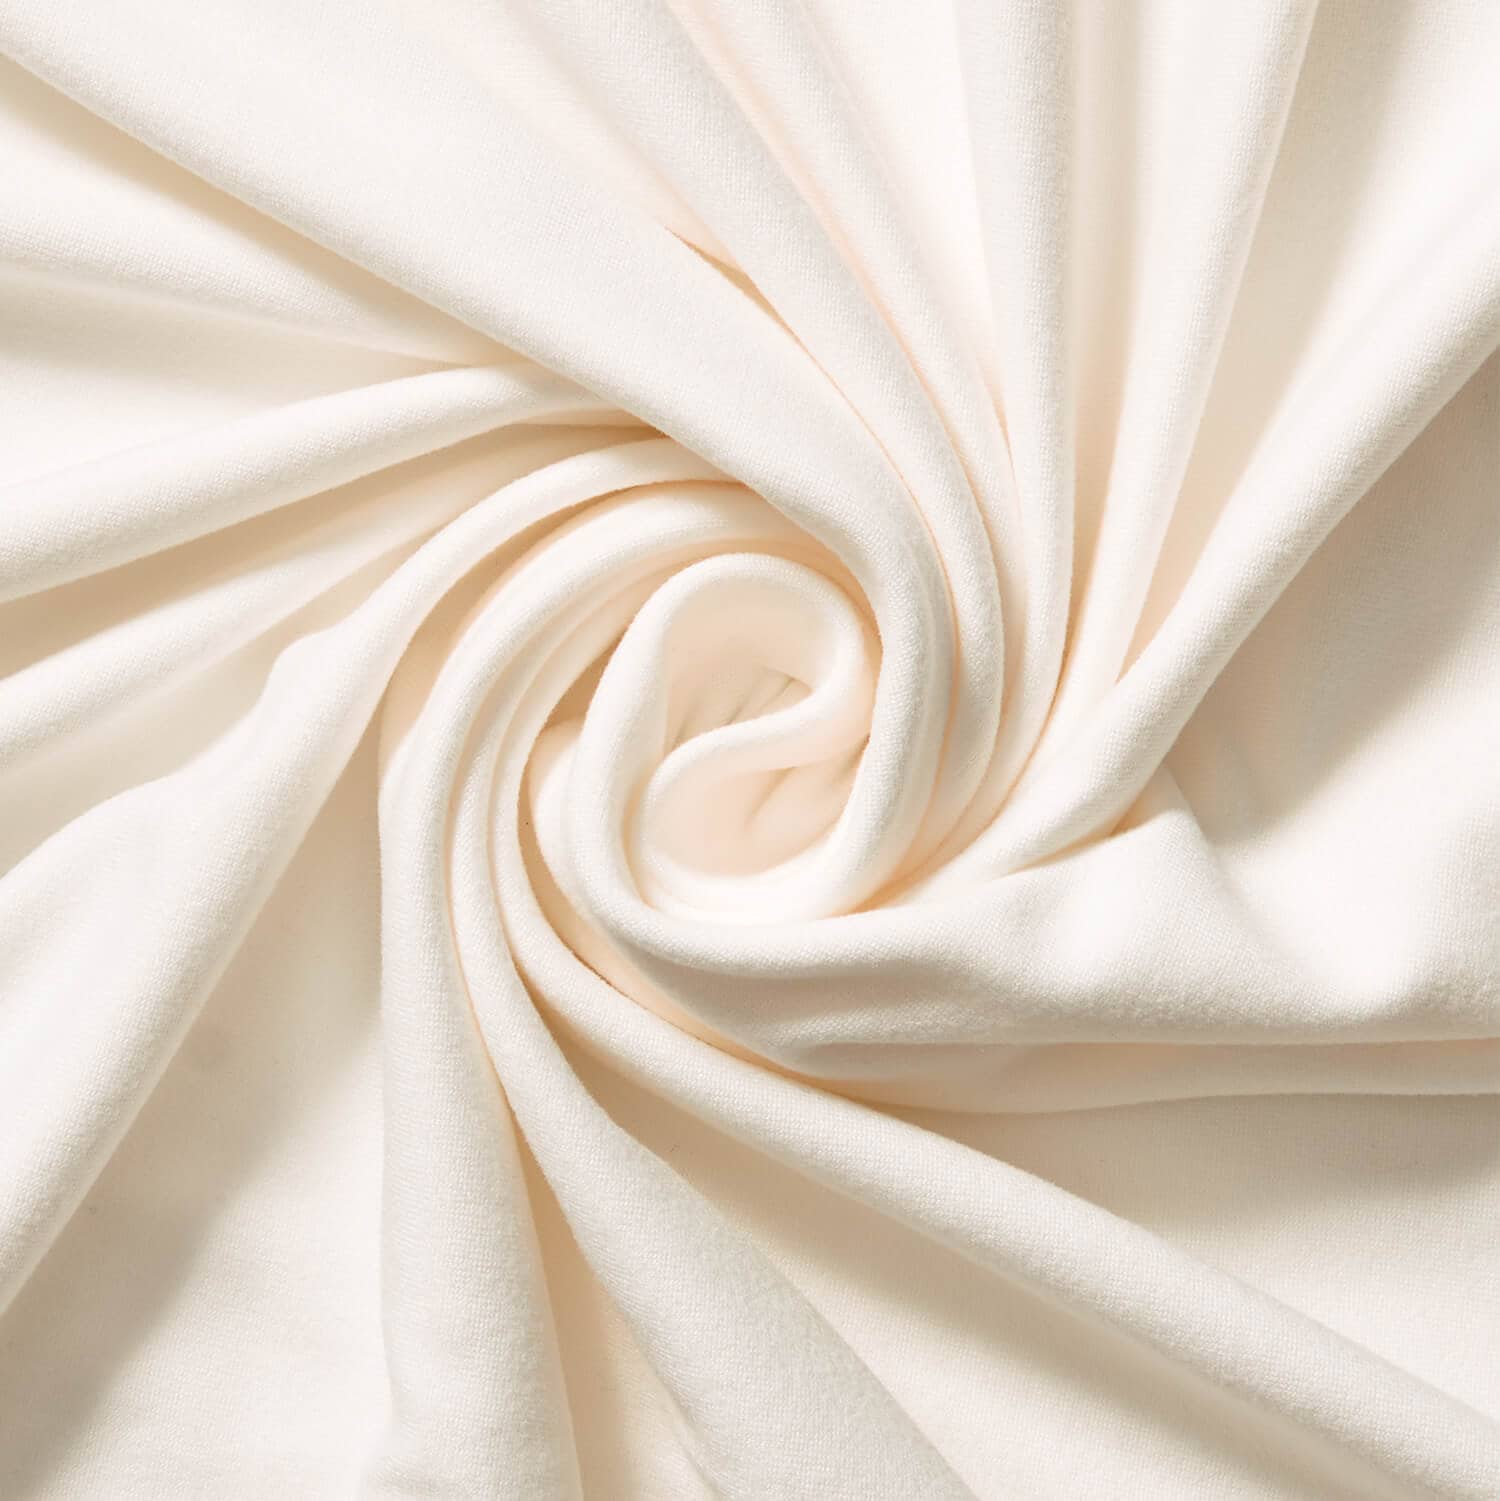 180gsm Coated Nylon Ripstop Fabric, 100% Polyester